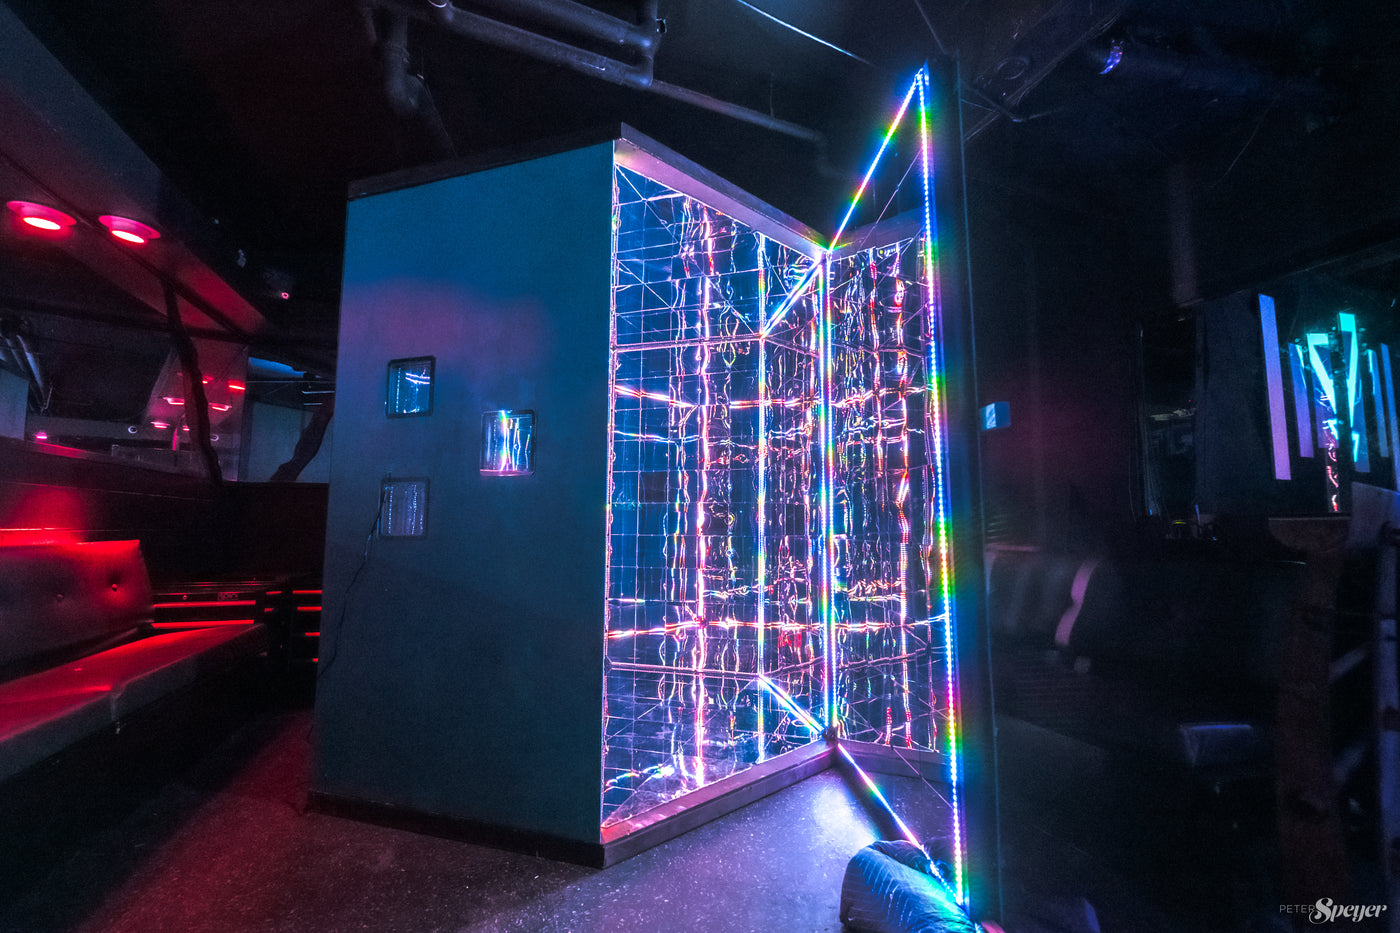 Long box full of strip lights that you can walk into for an immersive LED art experience at a club event